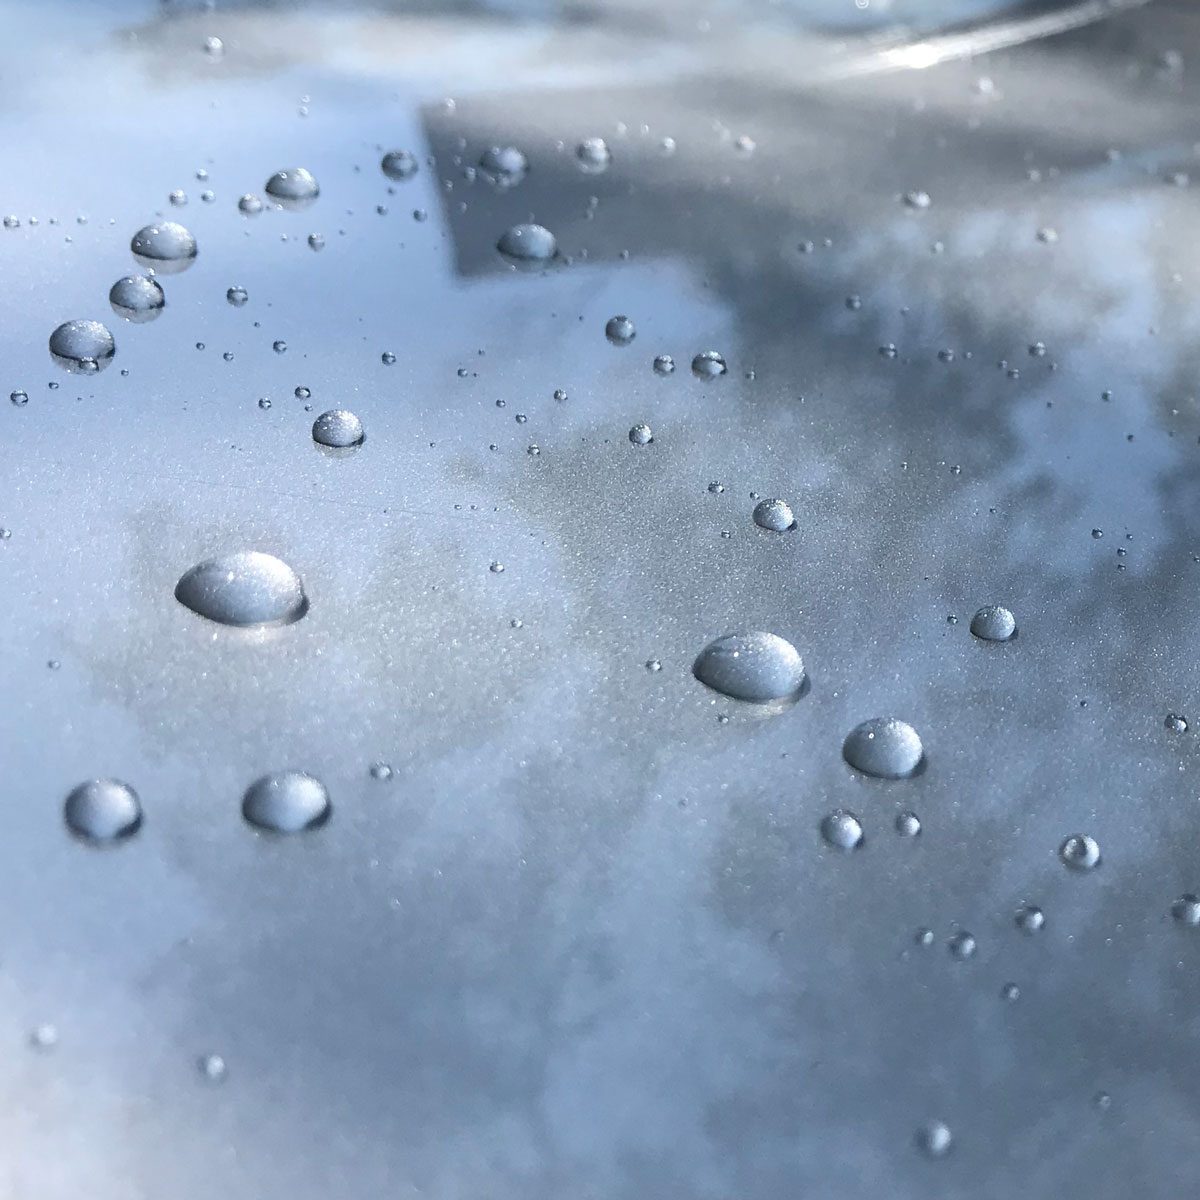 Water beads on waxed car